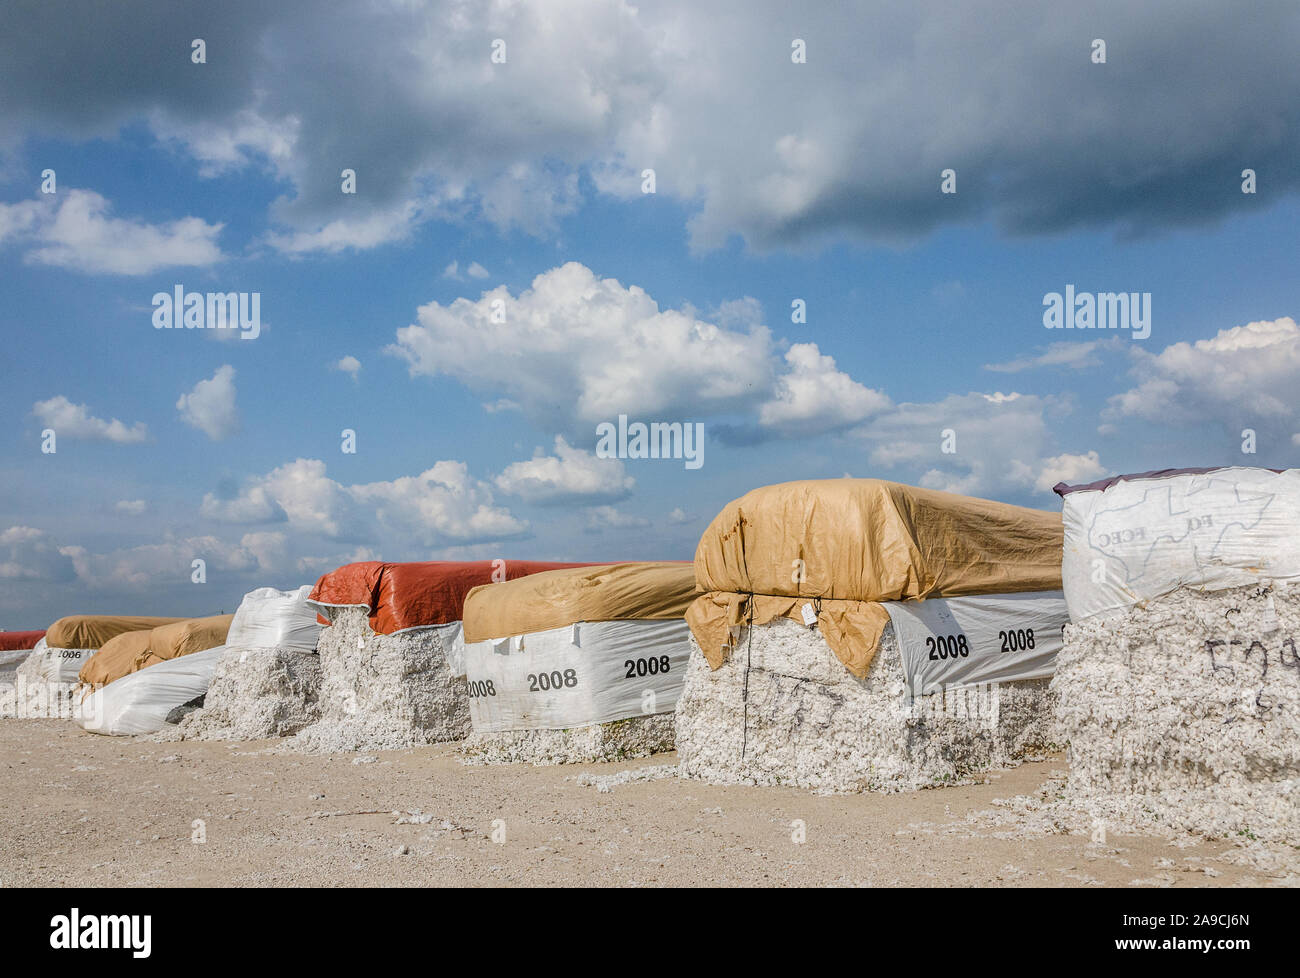 Rain-soaked modules of unginned cotton sit in the yard at the United Agricultural Cooperative after Hurricane Harvey in Danevang, Texas. Stock Photo